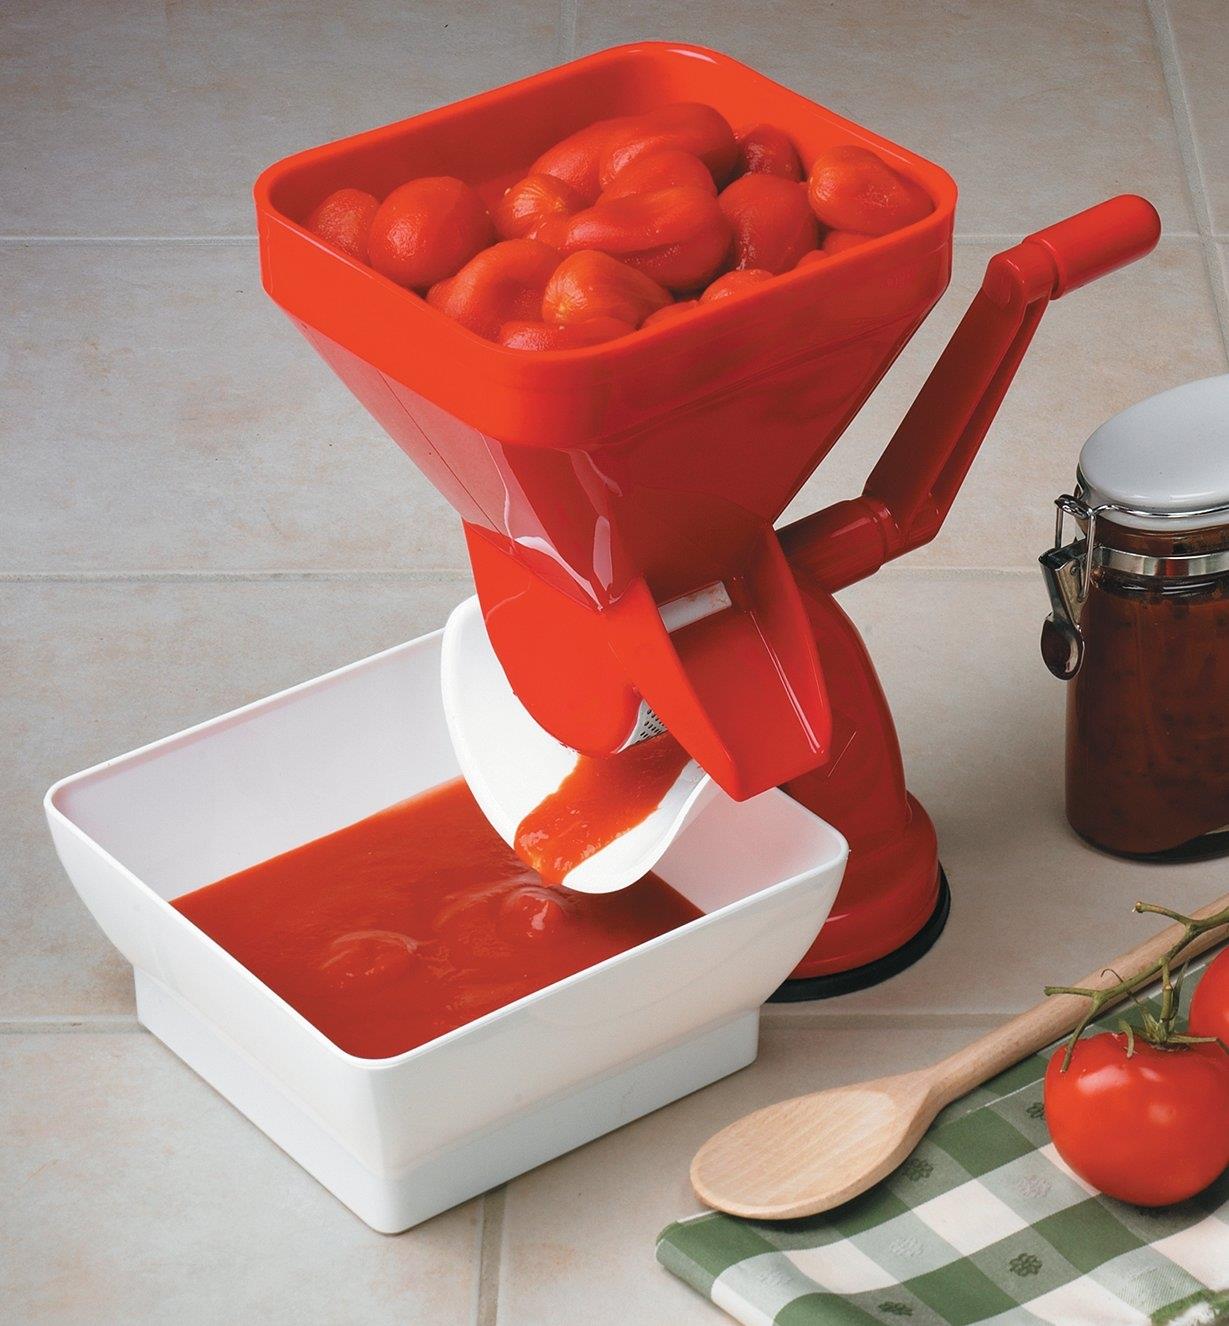 Tomato press sits on a counter with the hopper full of whole tomatoes and pulp running into the catch bowl